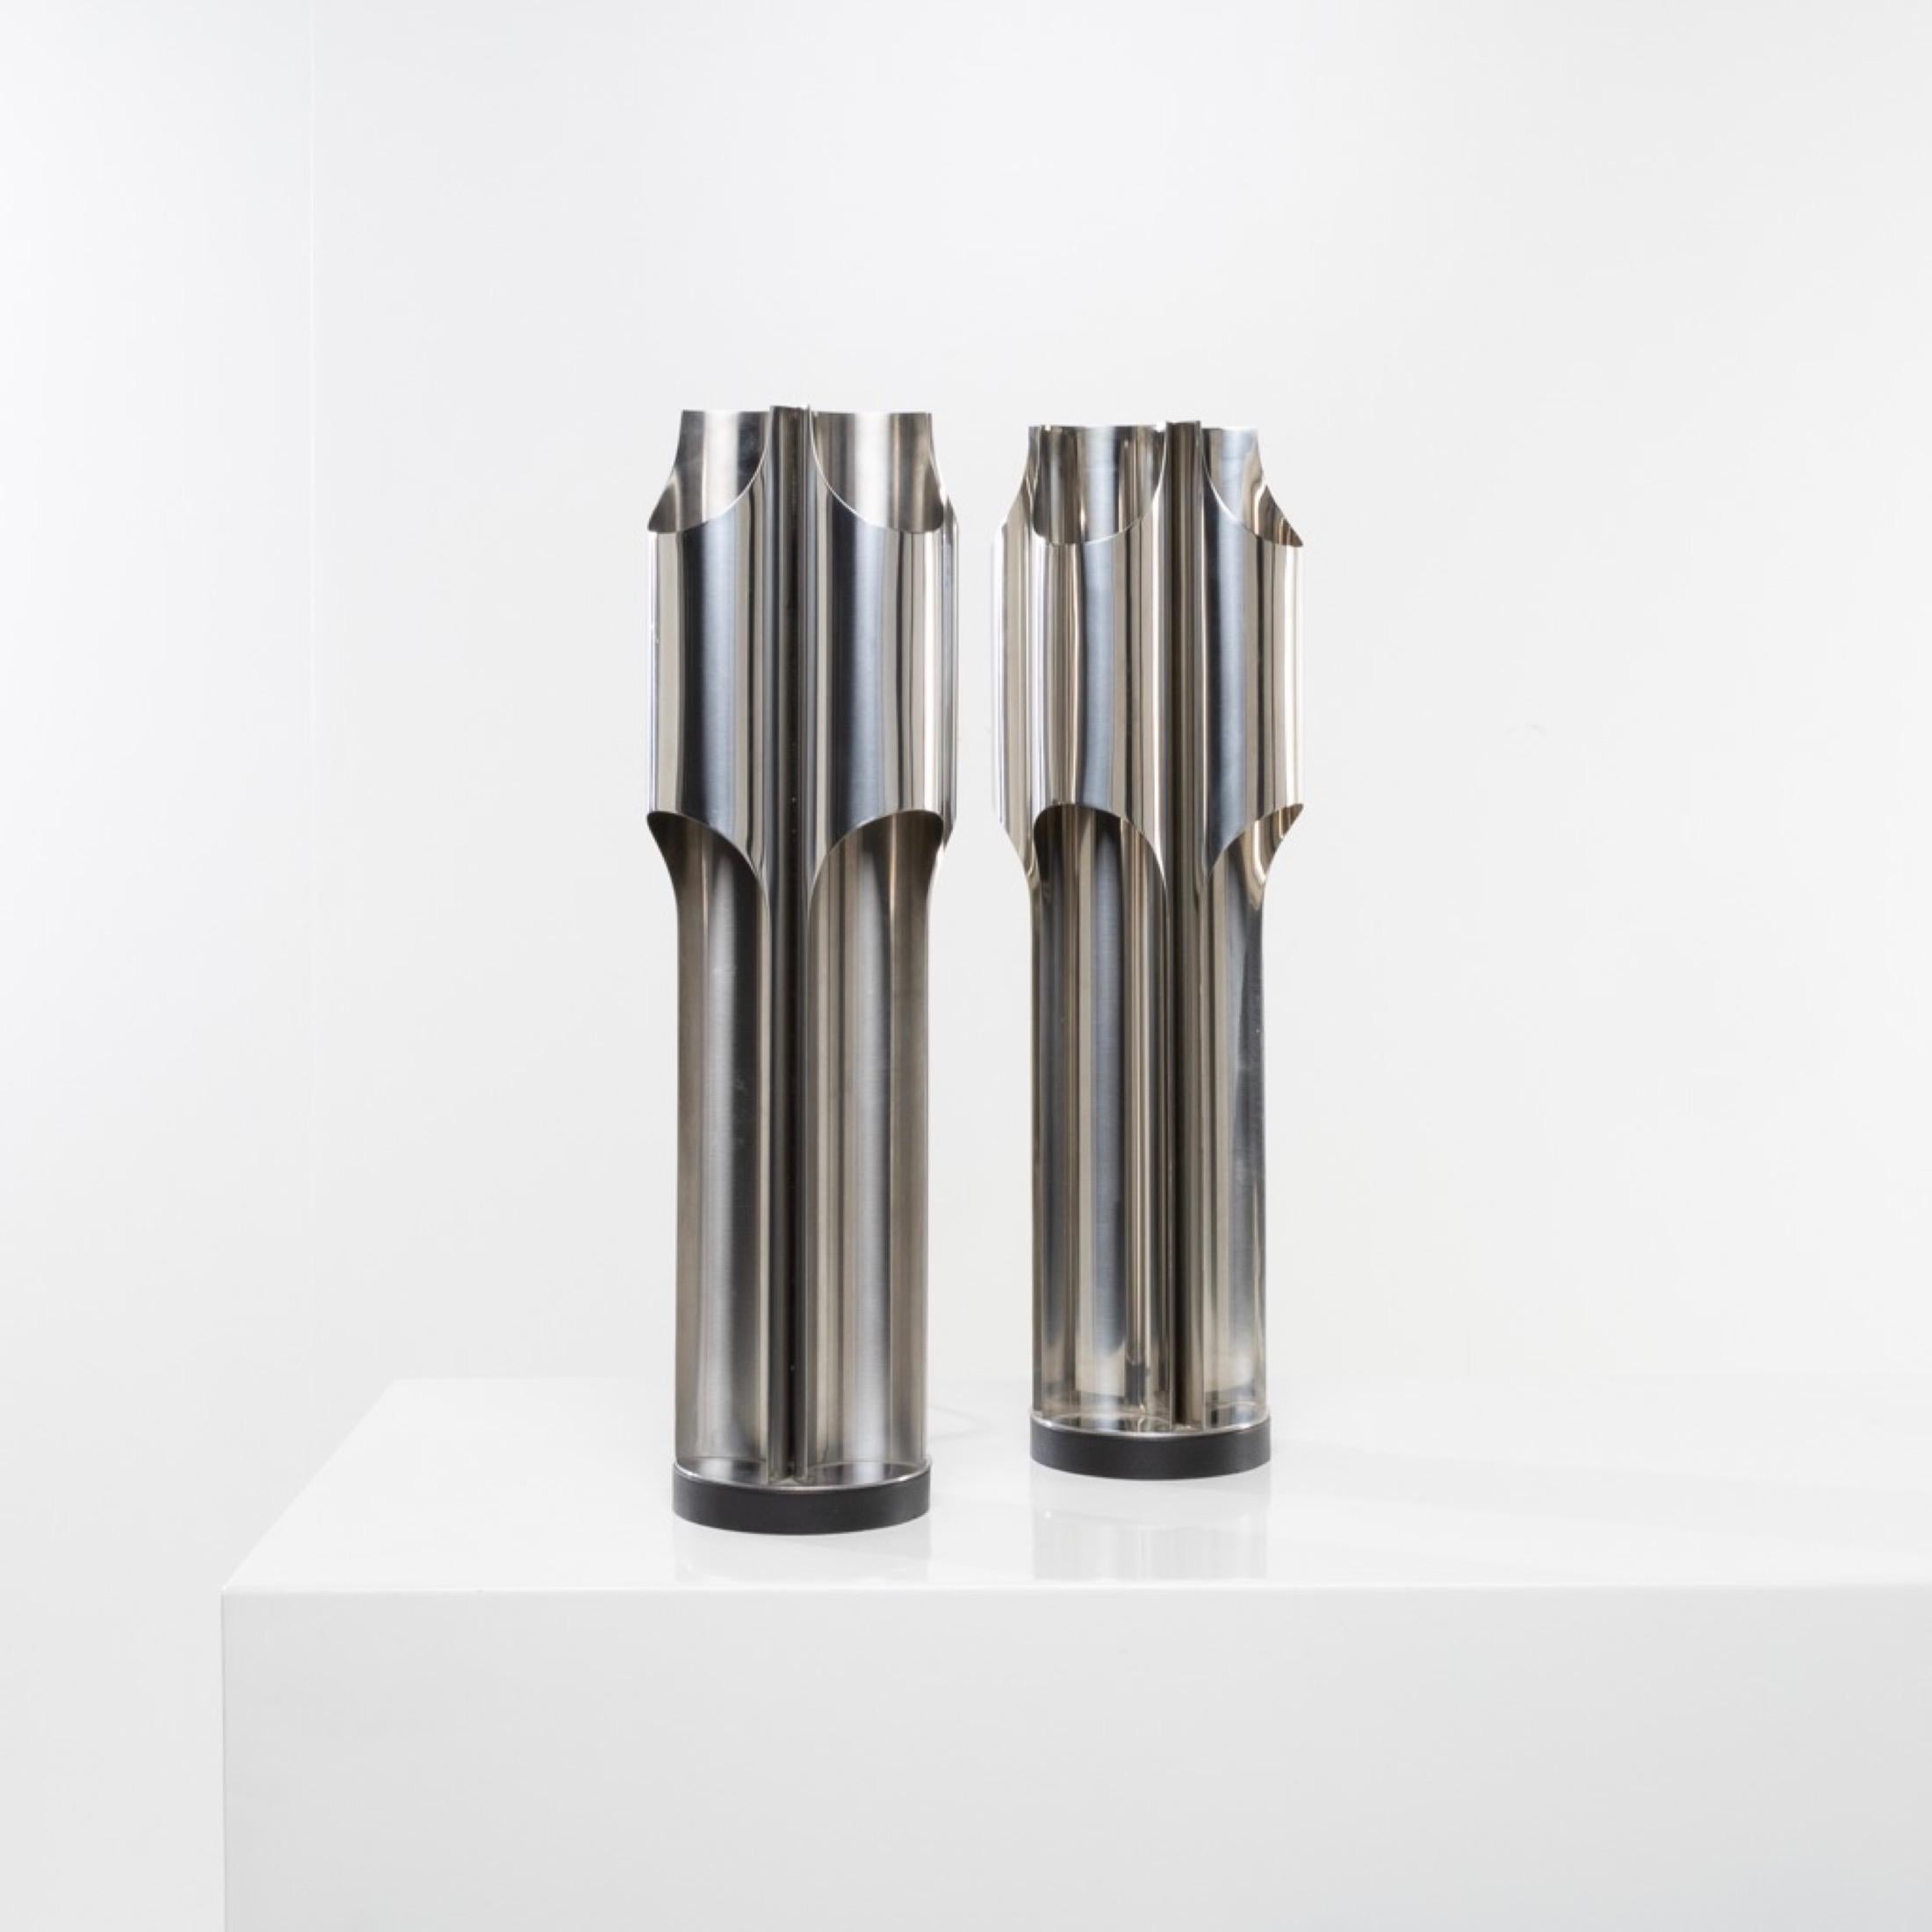 Pair of stainless steel lamps designed and manufactured by Maison Charles in Paris (Fr).
The steel base covered with a black imitation leather.
Each of the 4 organ pipes contains 2 bulbs (E27 socket), one illuminating the top, the other the